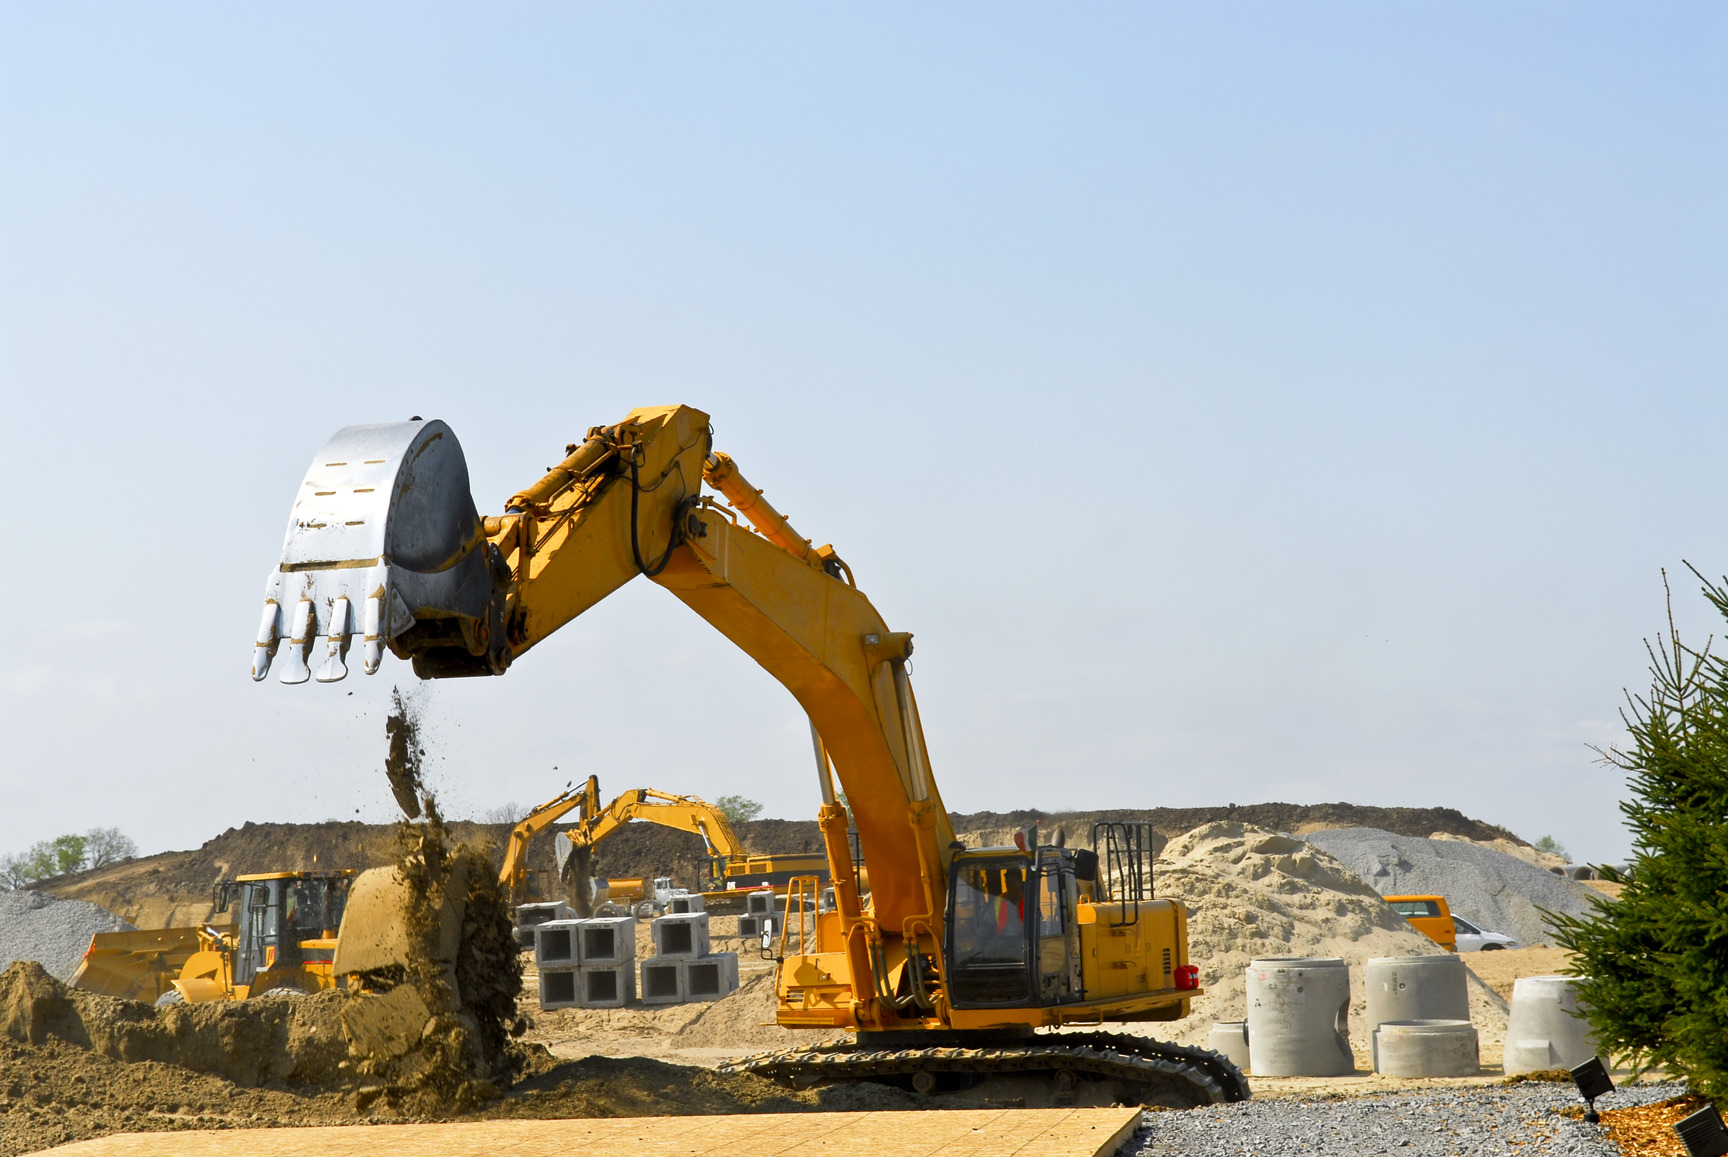 Landfill Cell Construction Bid Documents Available Now!